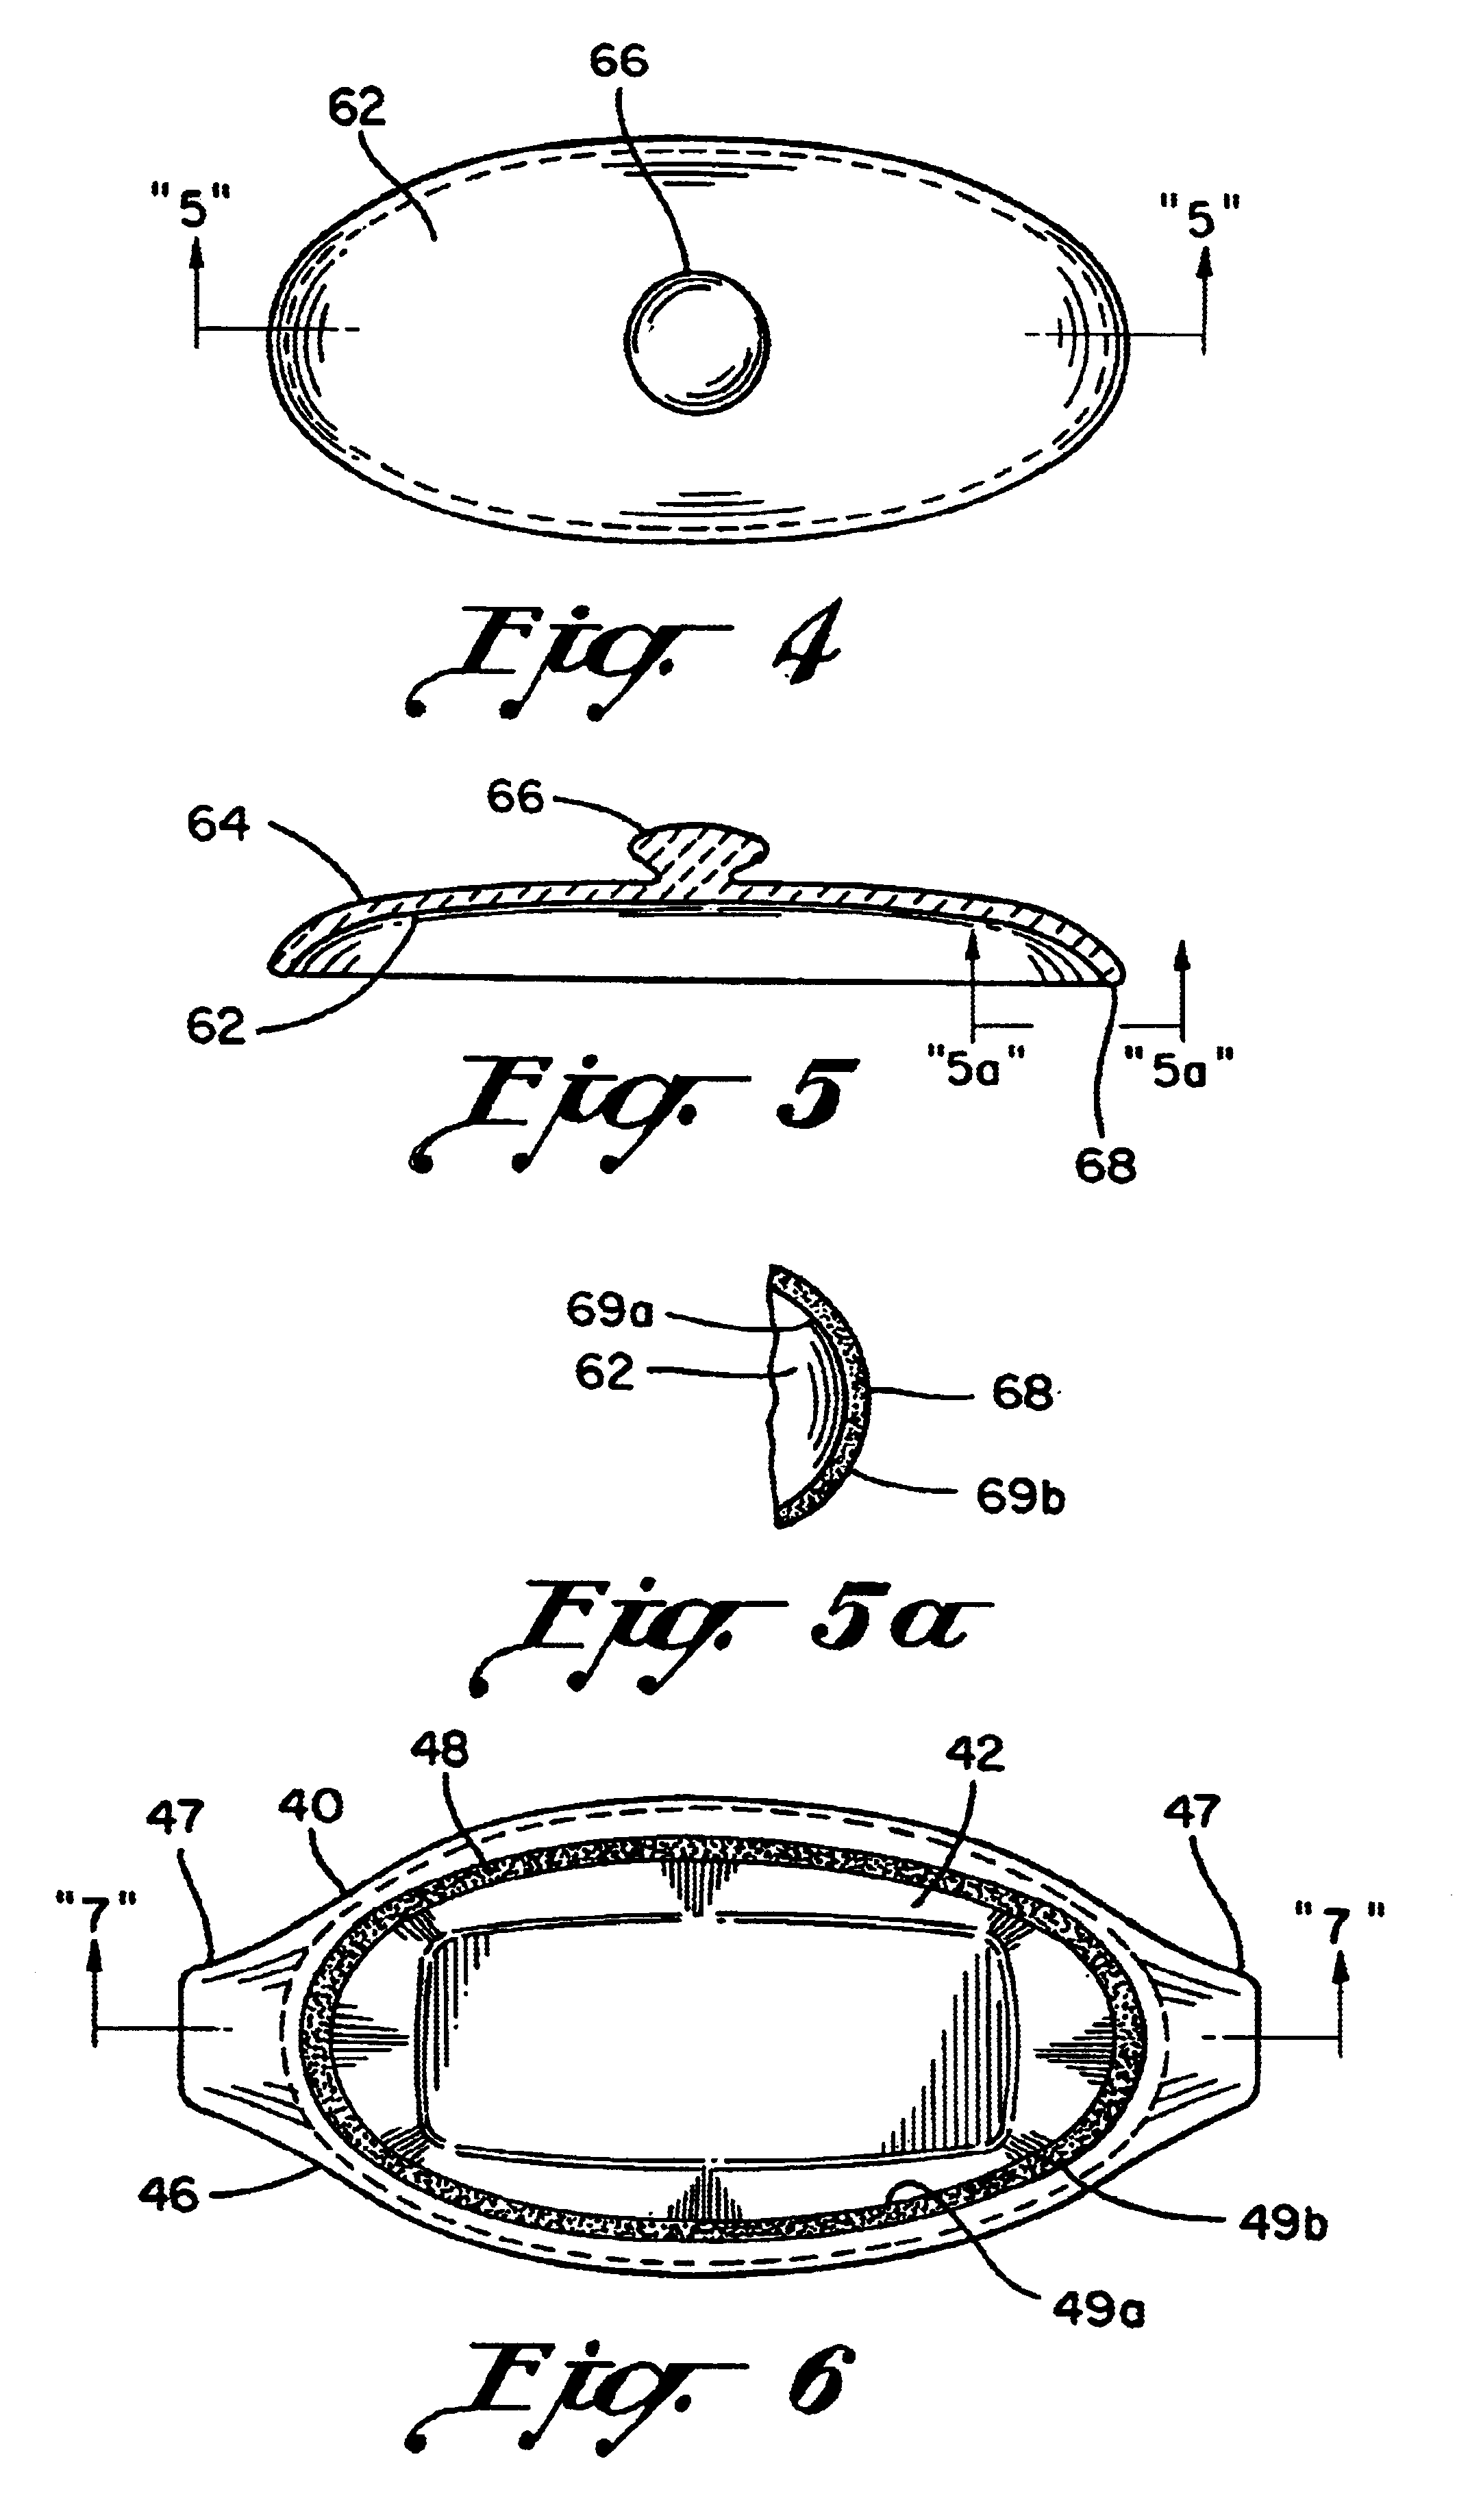 Container assembly for maintaining container contents in a desired ambient temperature